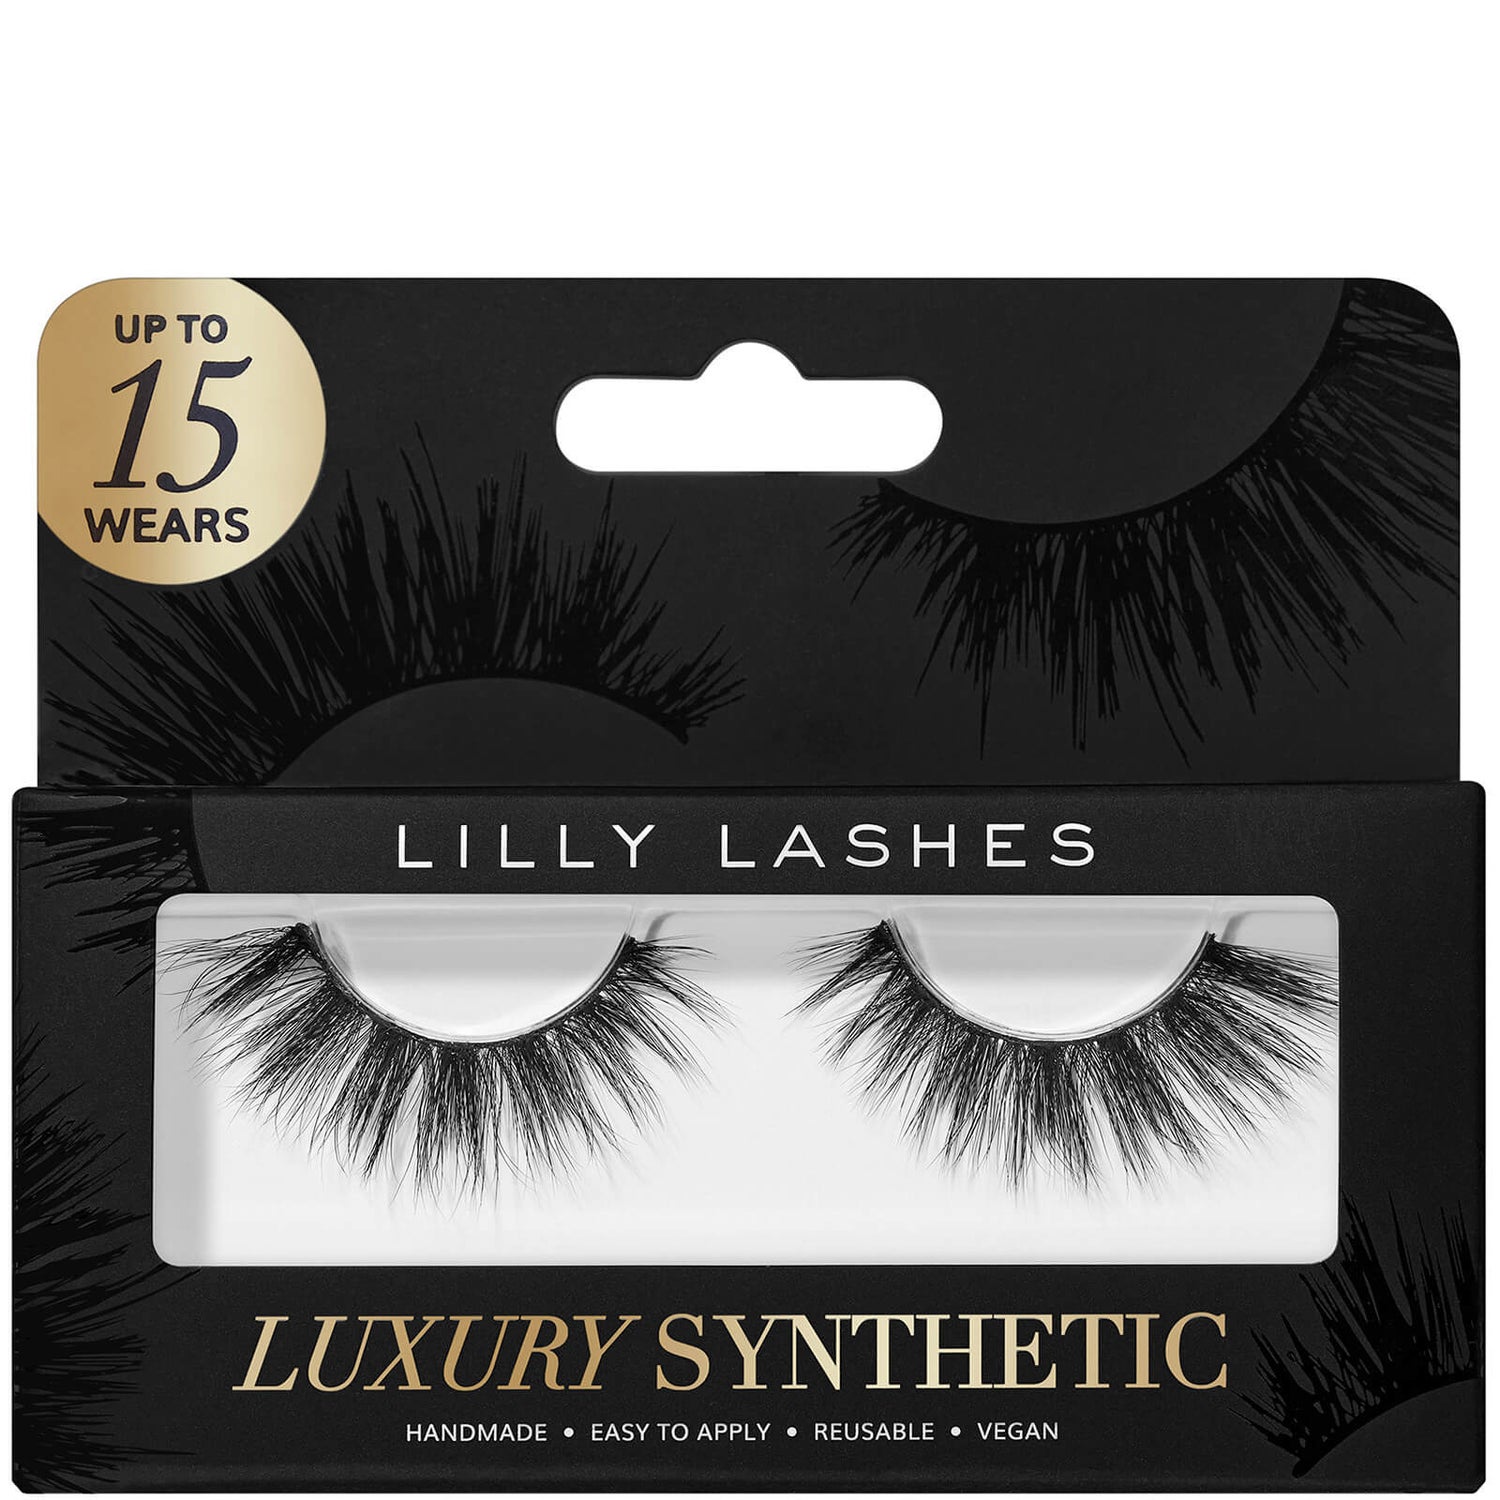 Lilly Lashes Luxury Synthetic ciglia finte - Indulge